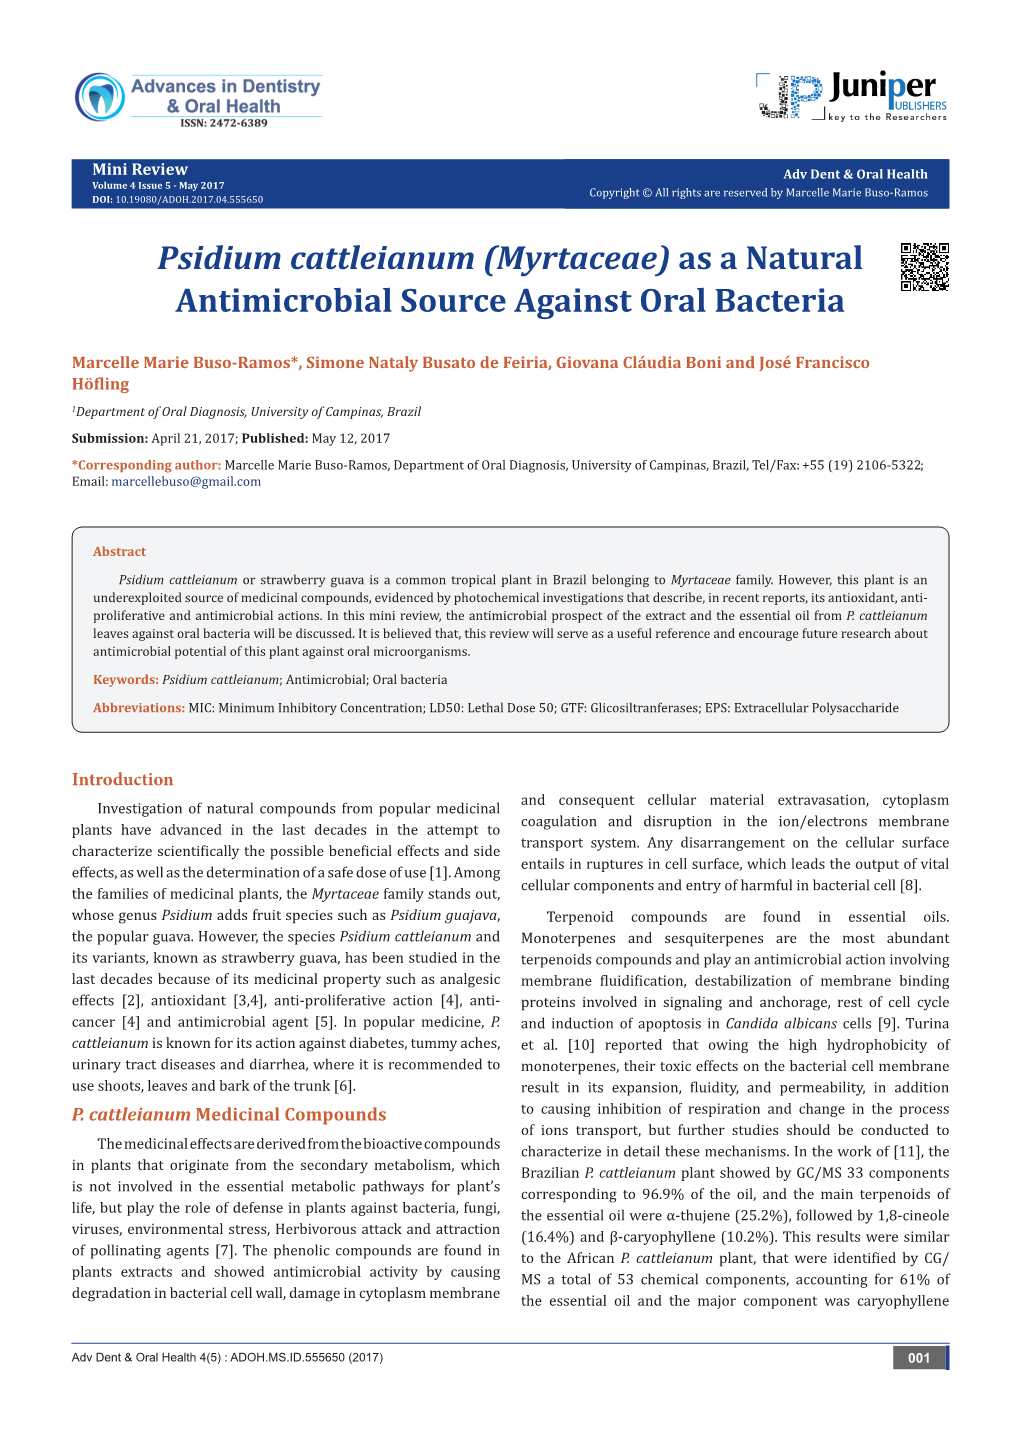 Psidium Cattleianum (Myrtaceae) As a Natural Antimicrobial Source Against Oral Bacteria